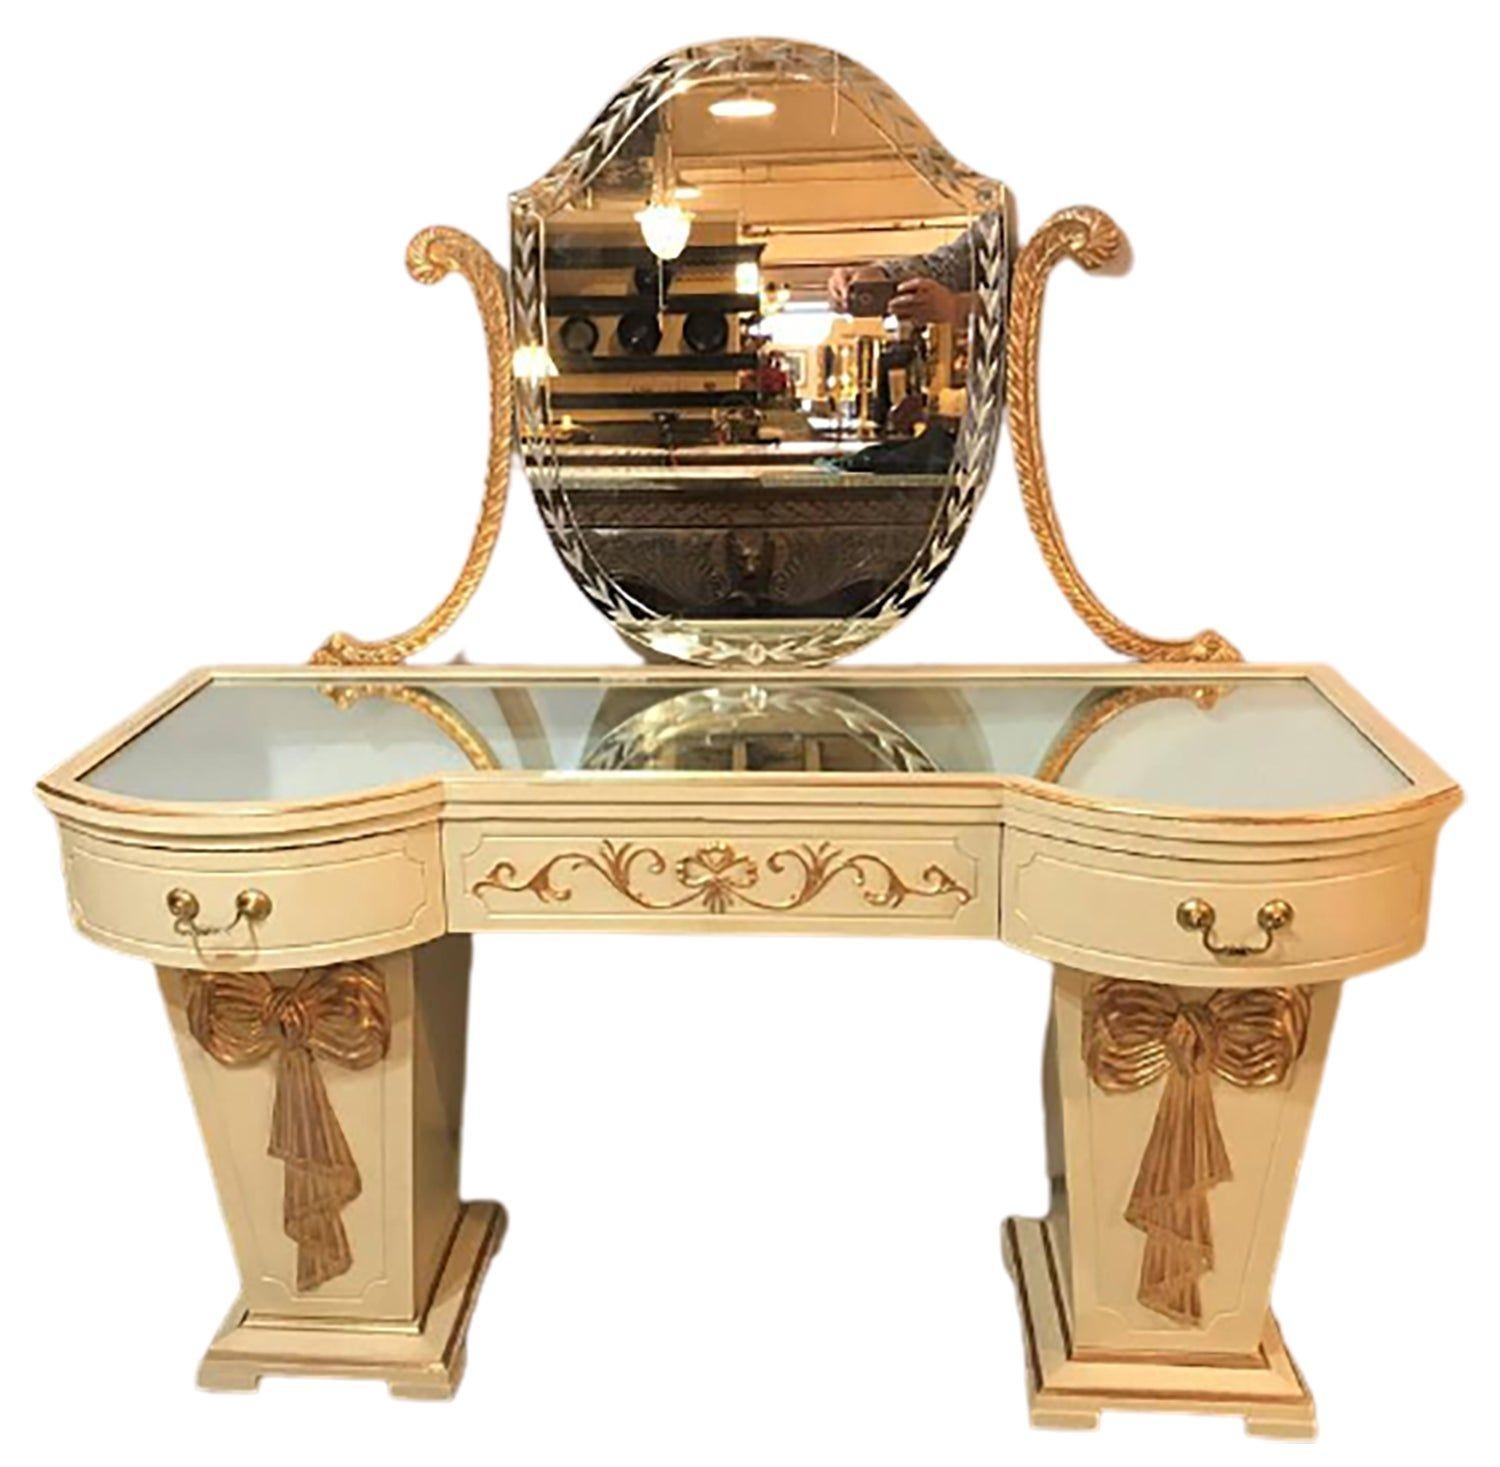 Hollywood Regency Grosfeld House Parcel Paint and Gilt Decorated Vanity or Desk

Grosfeld House parcel paint and gilt decorated vanity or desk with mirror. A fine one of a kind ribbon and tastle solid wood carved writing desk or ladies vanity. The